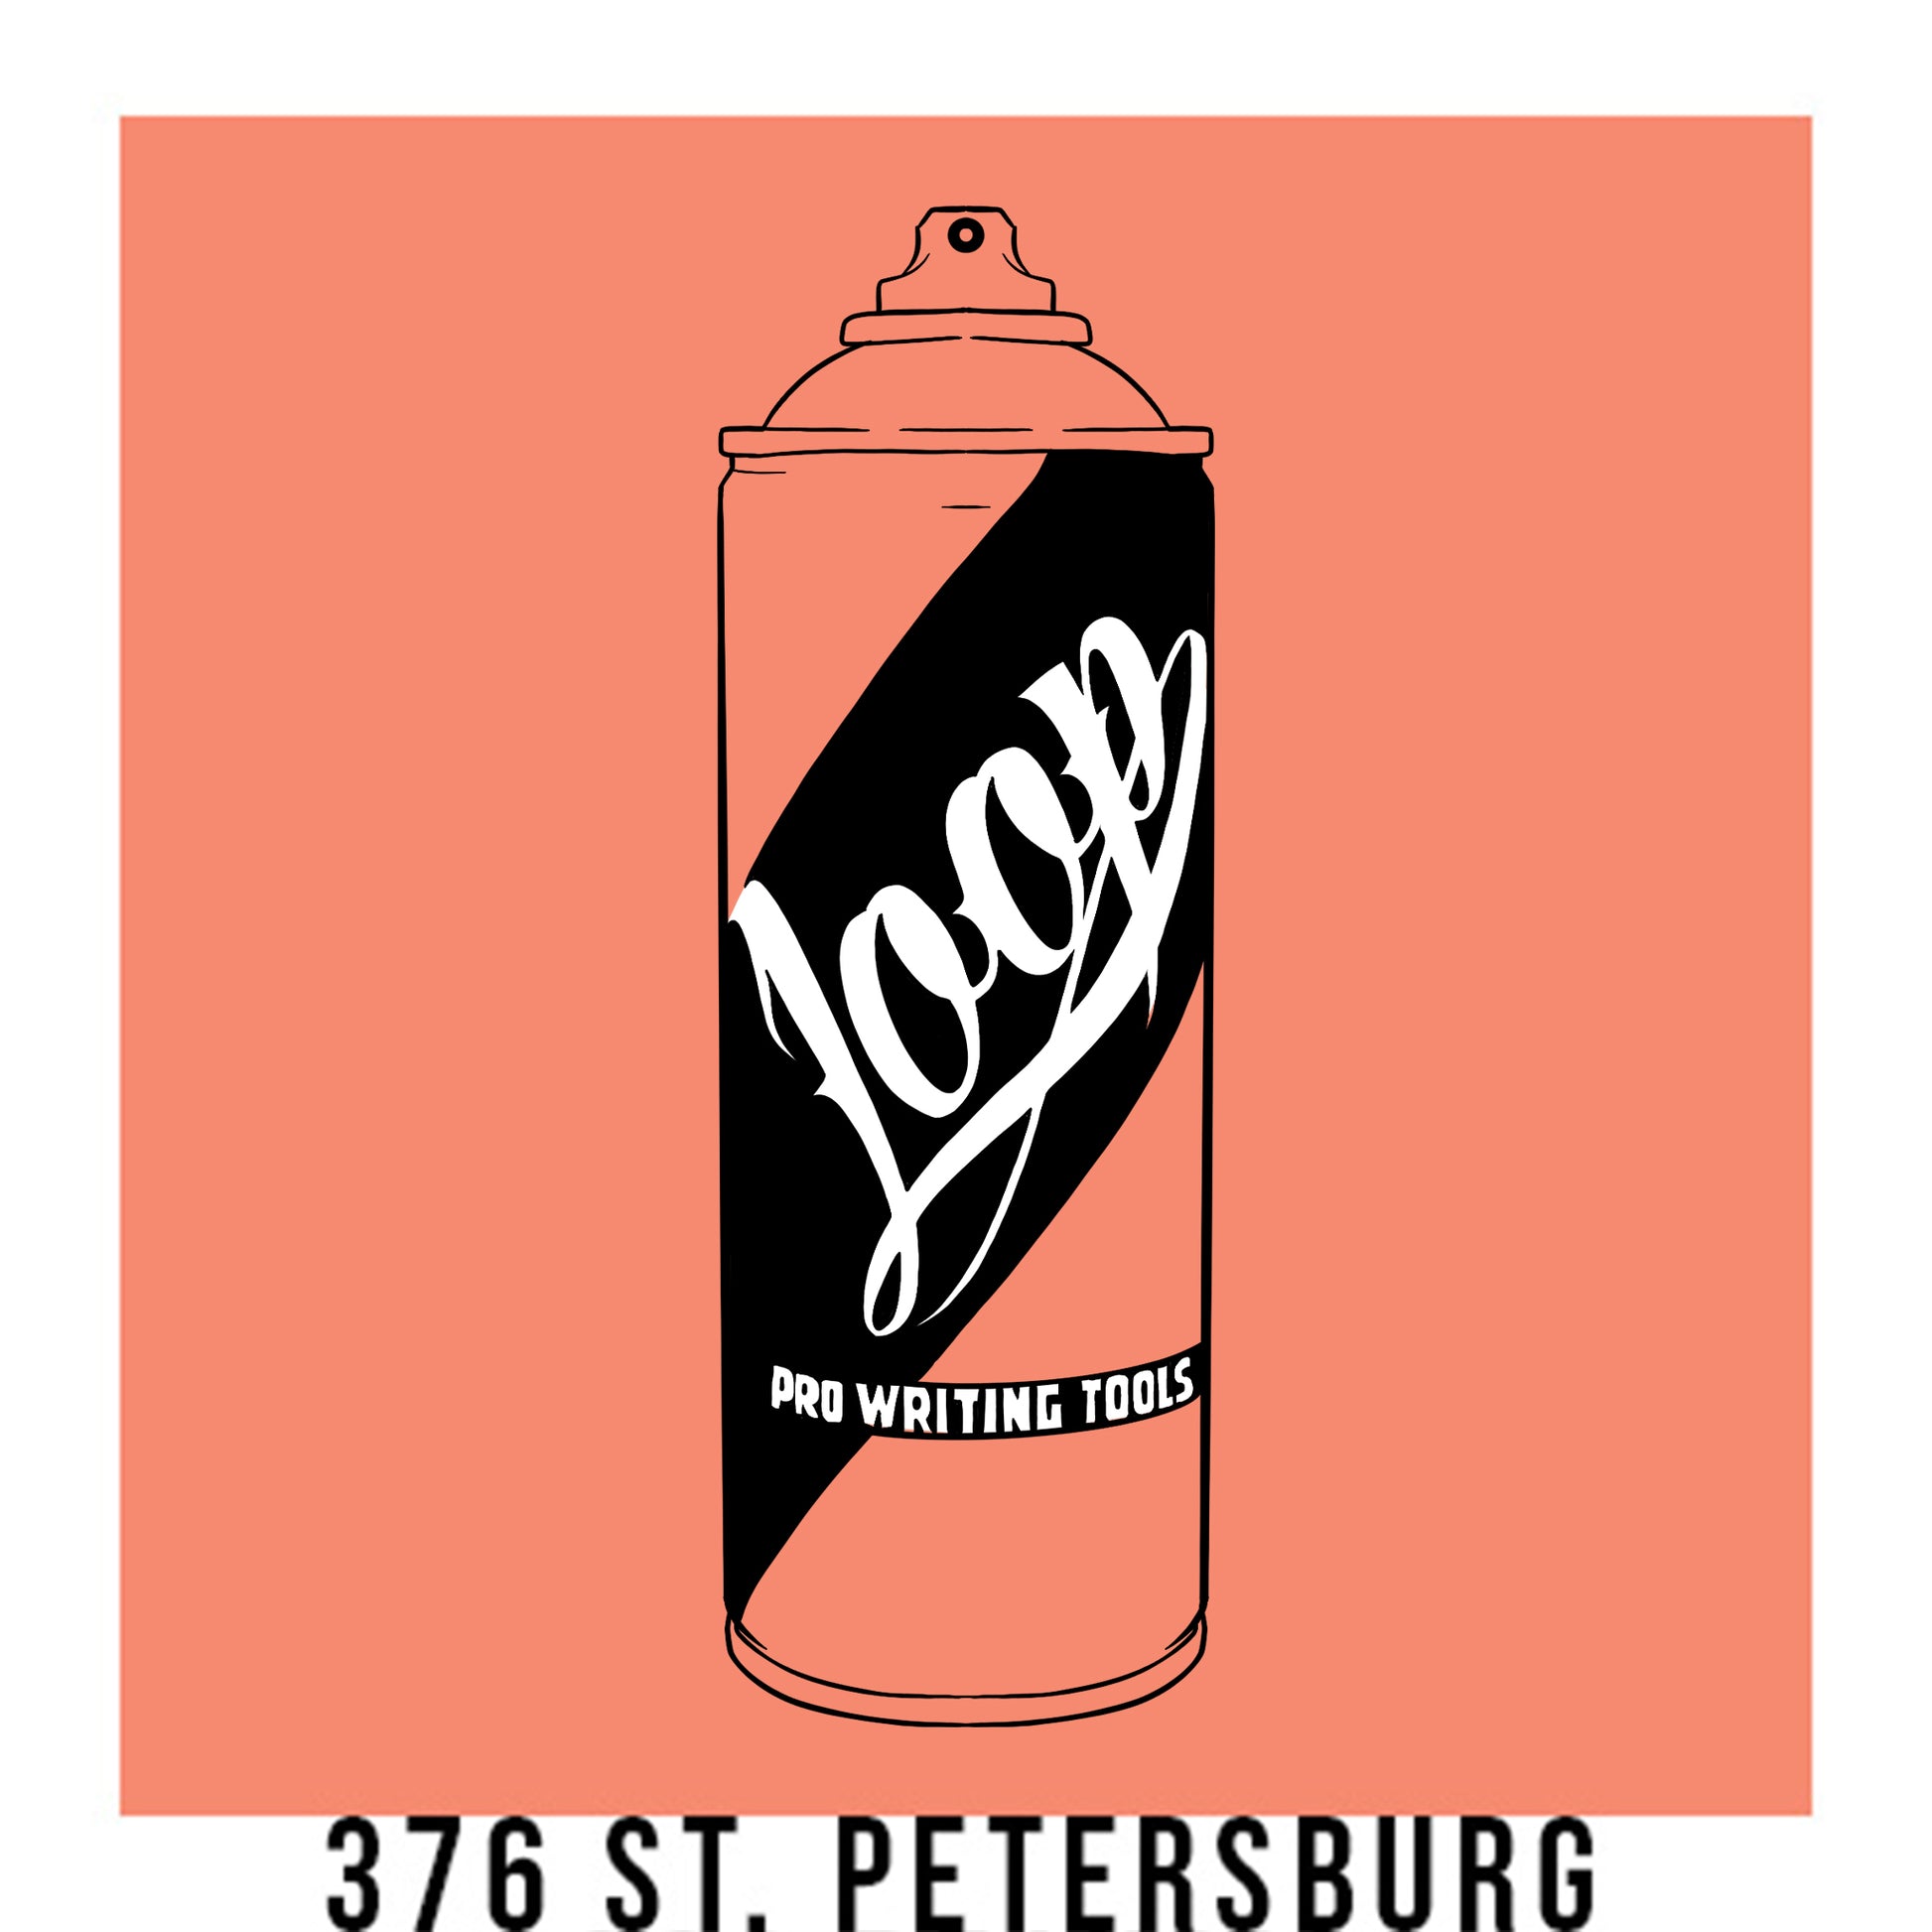 A black outline drawing of a peach spray paint can with the word "Loop" written on the face in script. The background is a color swatch of the same peach with a white border with the words "376 St.Petersburg" at the bottom.